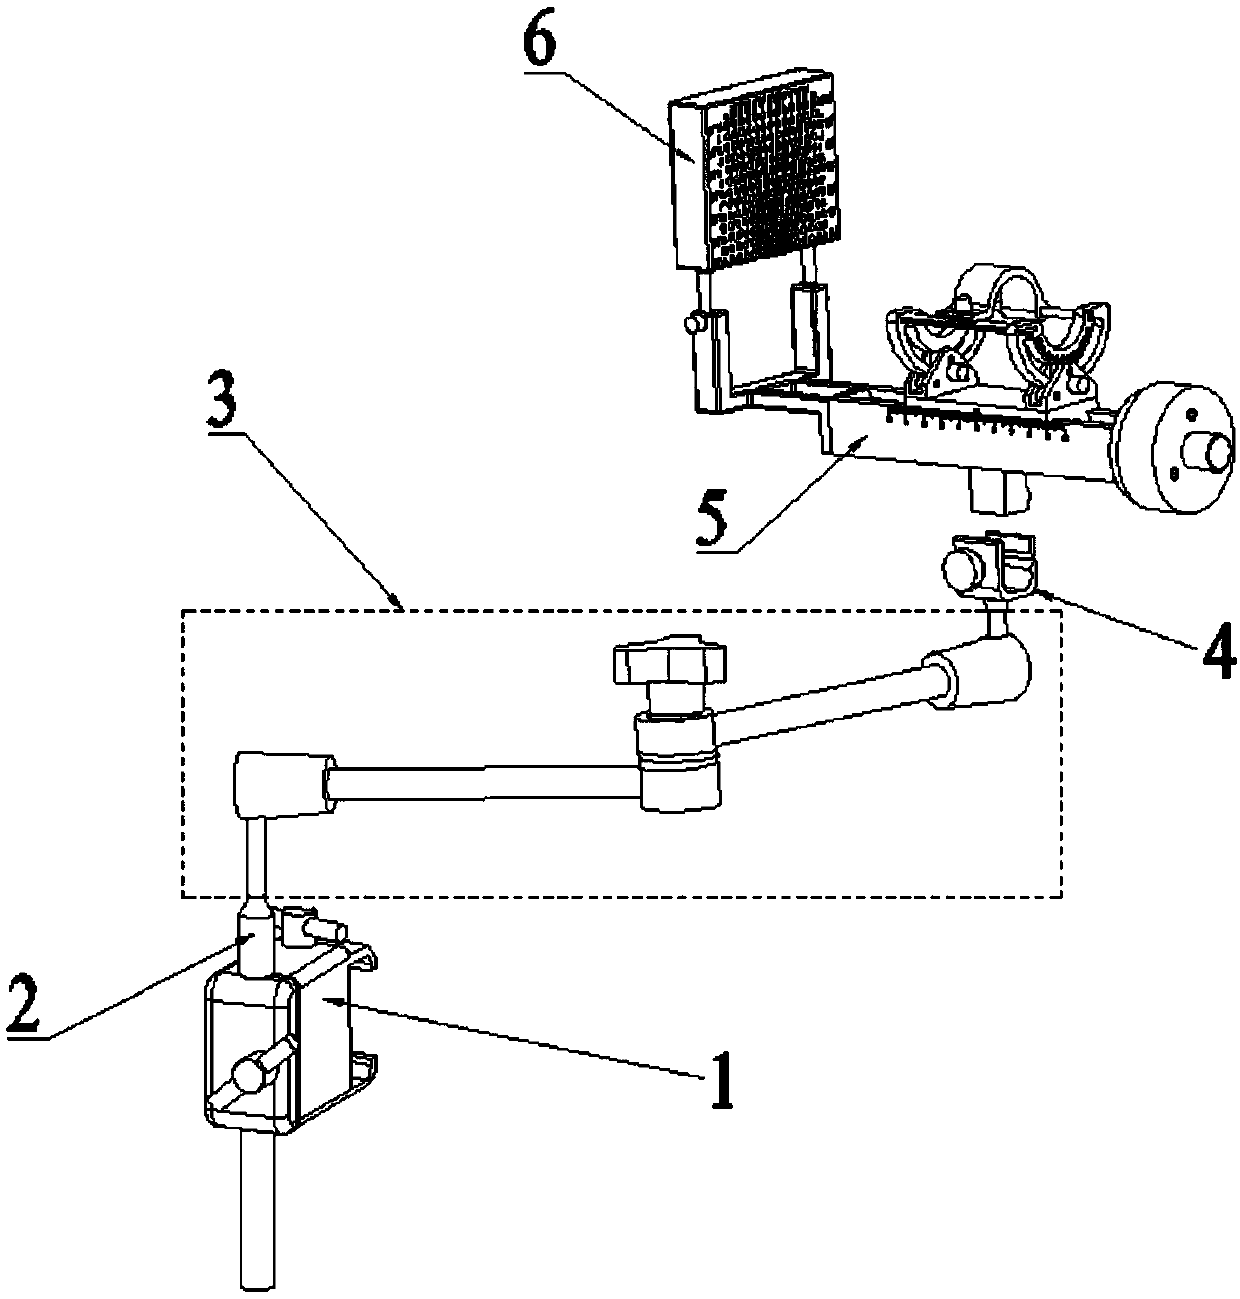 Biplane ultrasound-guided radioactive seed implantation system for prostates